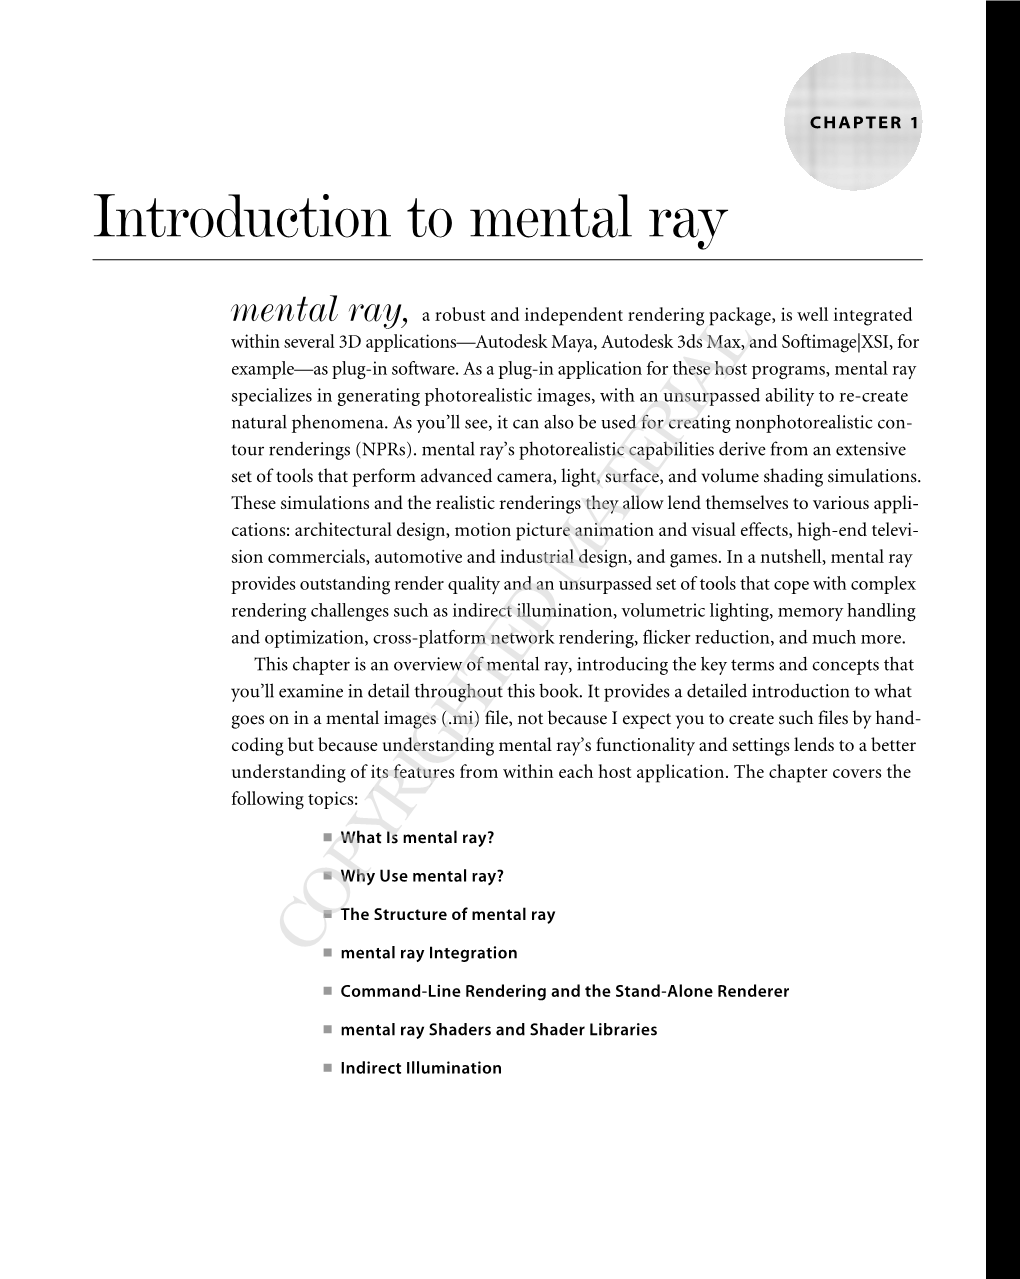 What Is Mental Ray?